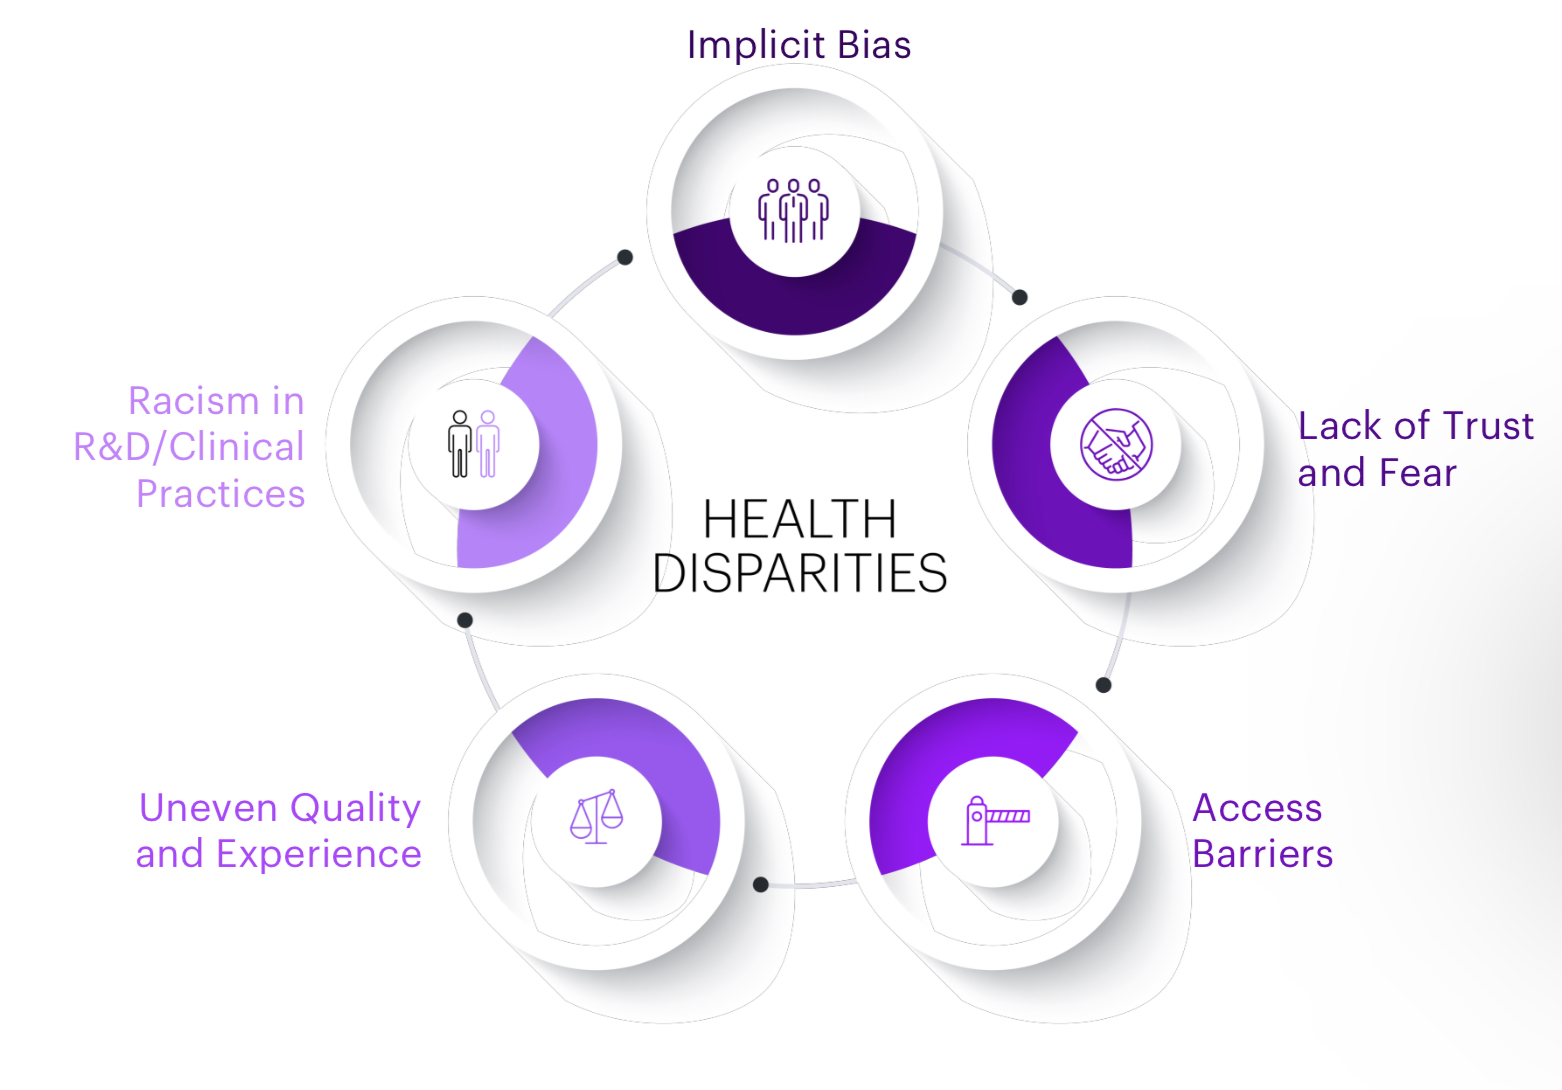 New Accenture Report Reveals Staggering Health Inequities and the Role of US Healthcare Ecosystem in Addressing Them